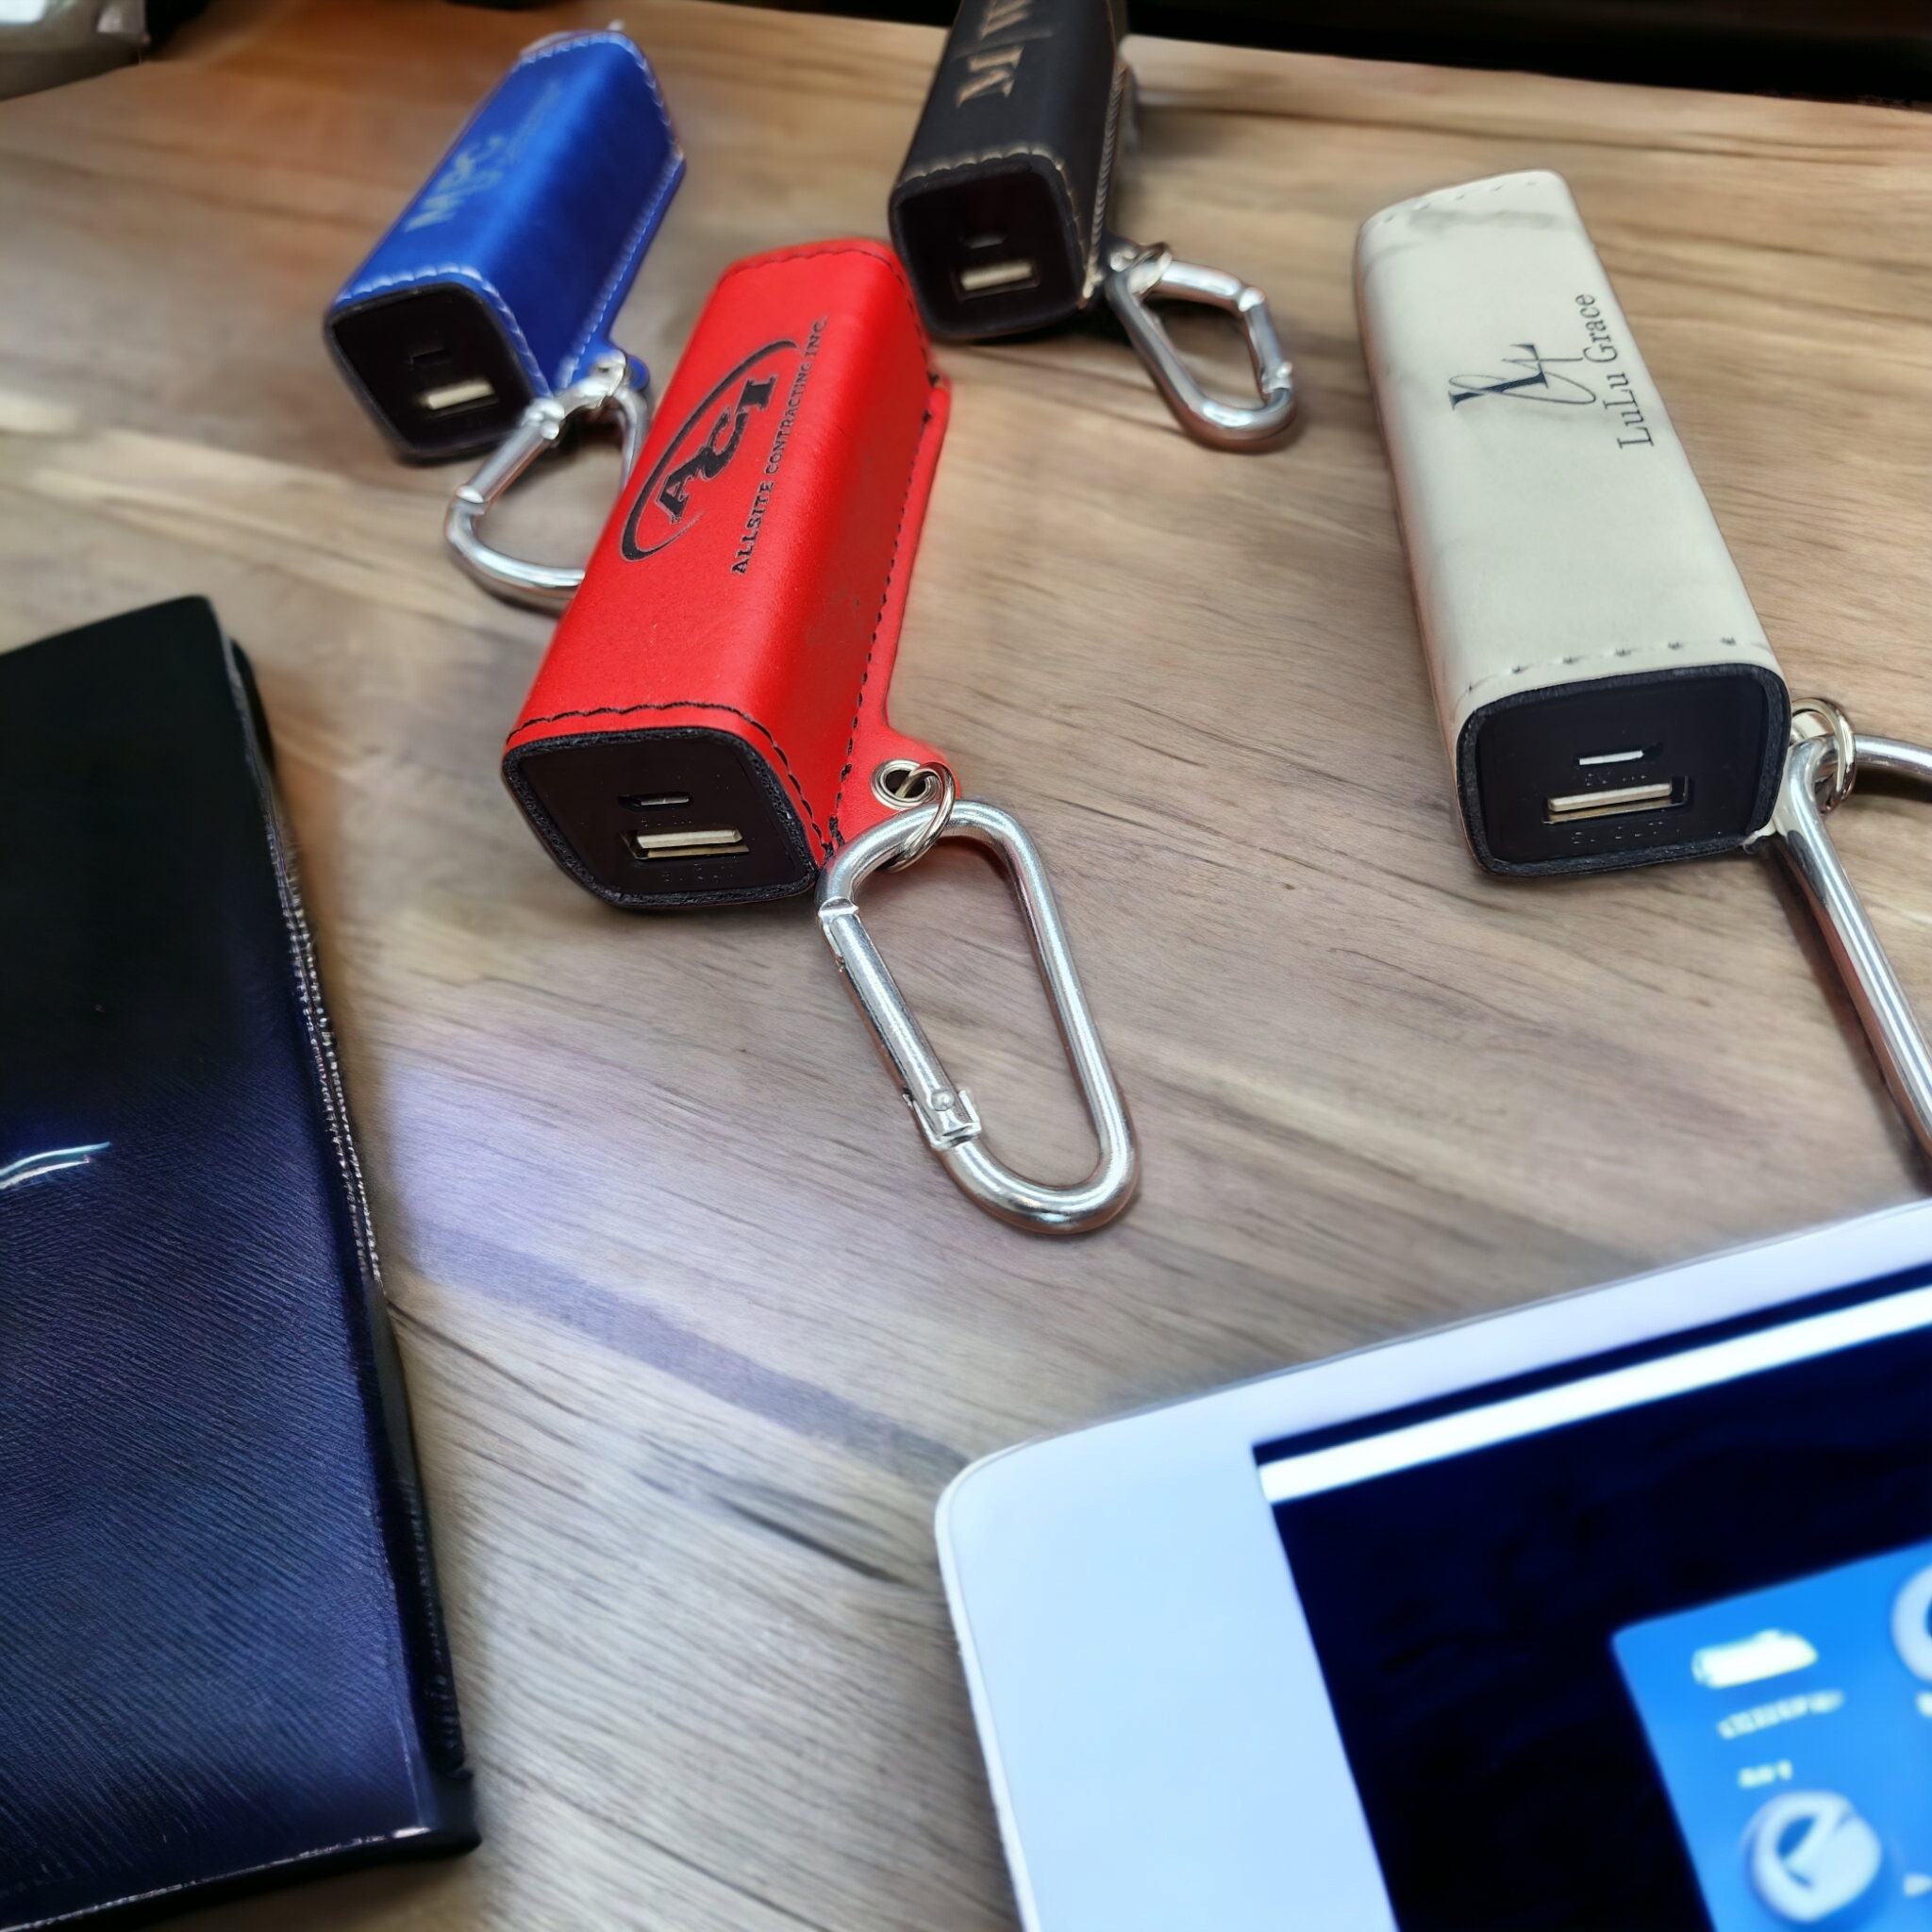 Custom Laser Engraved Leatherette 2200 mAh Power Bank with USB Cord and Carabiner